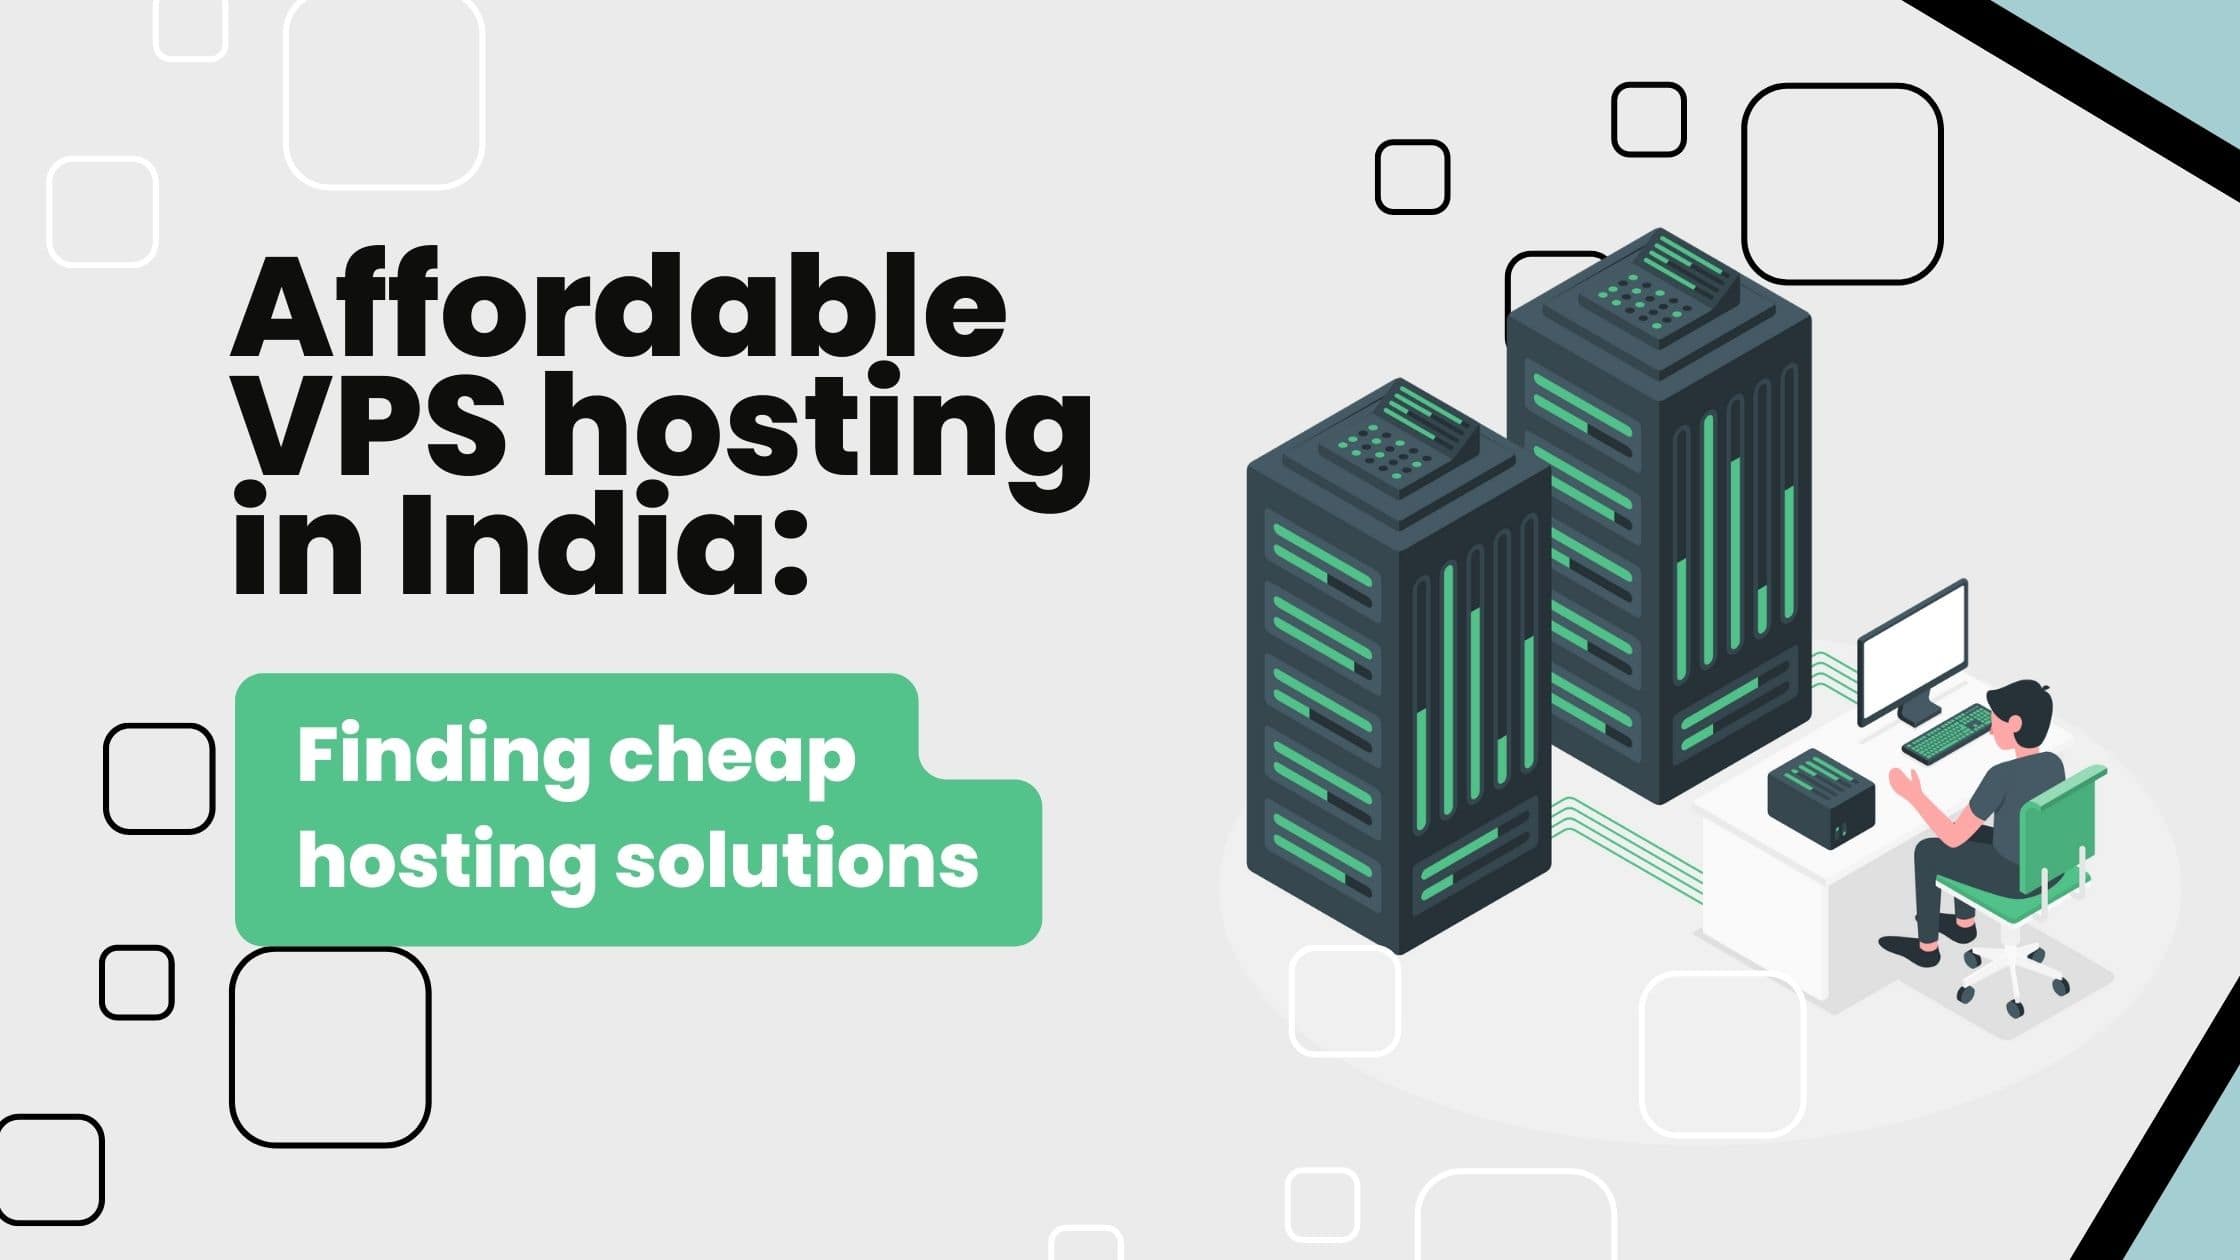 Affordable VPS hosting in India: Finding cheap hosting solutions